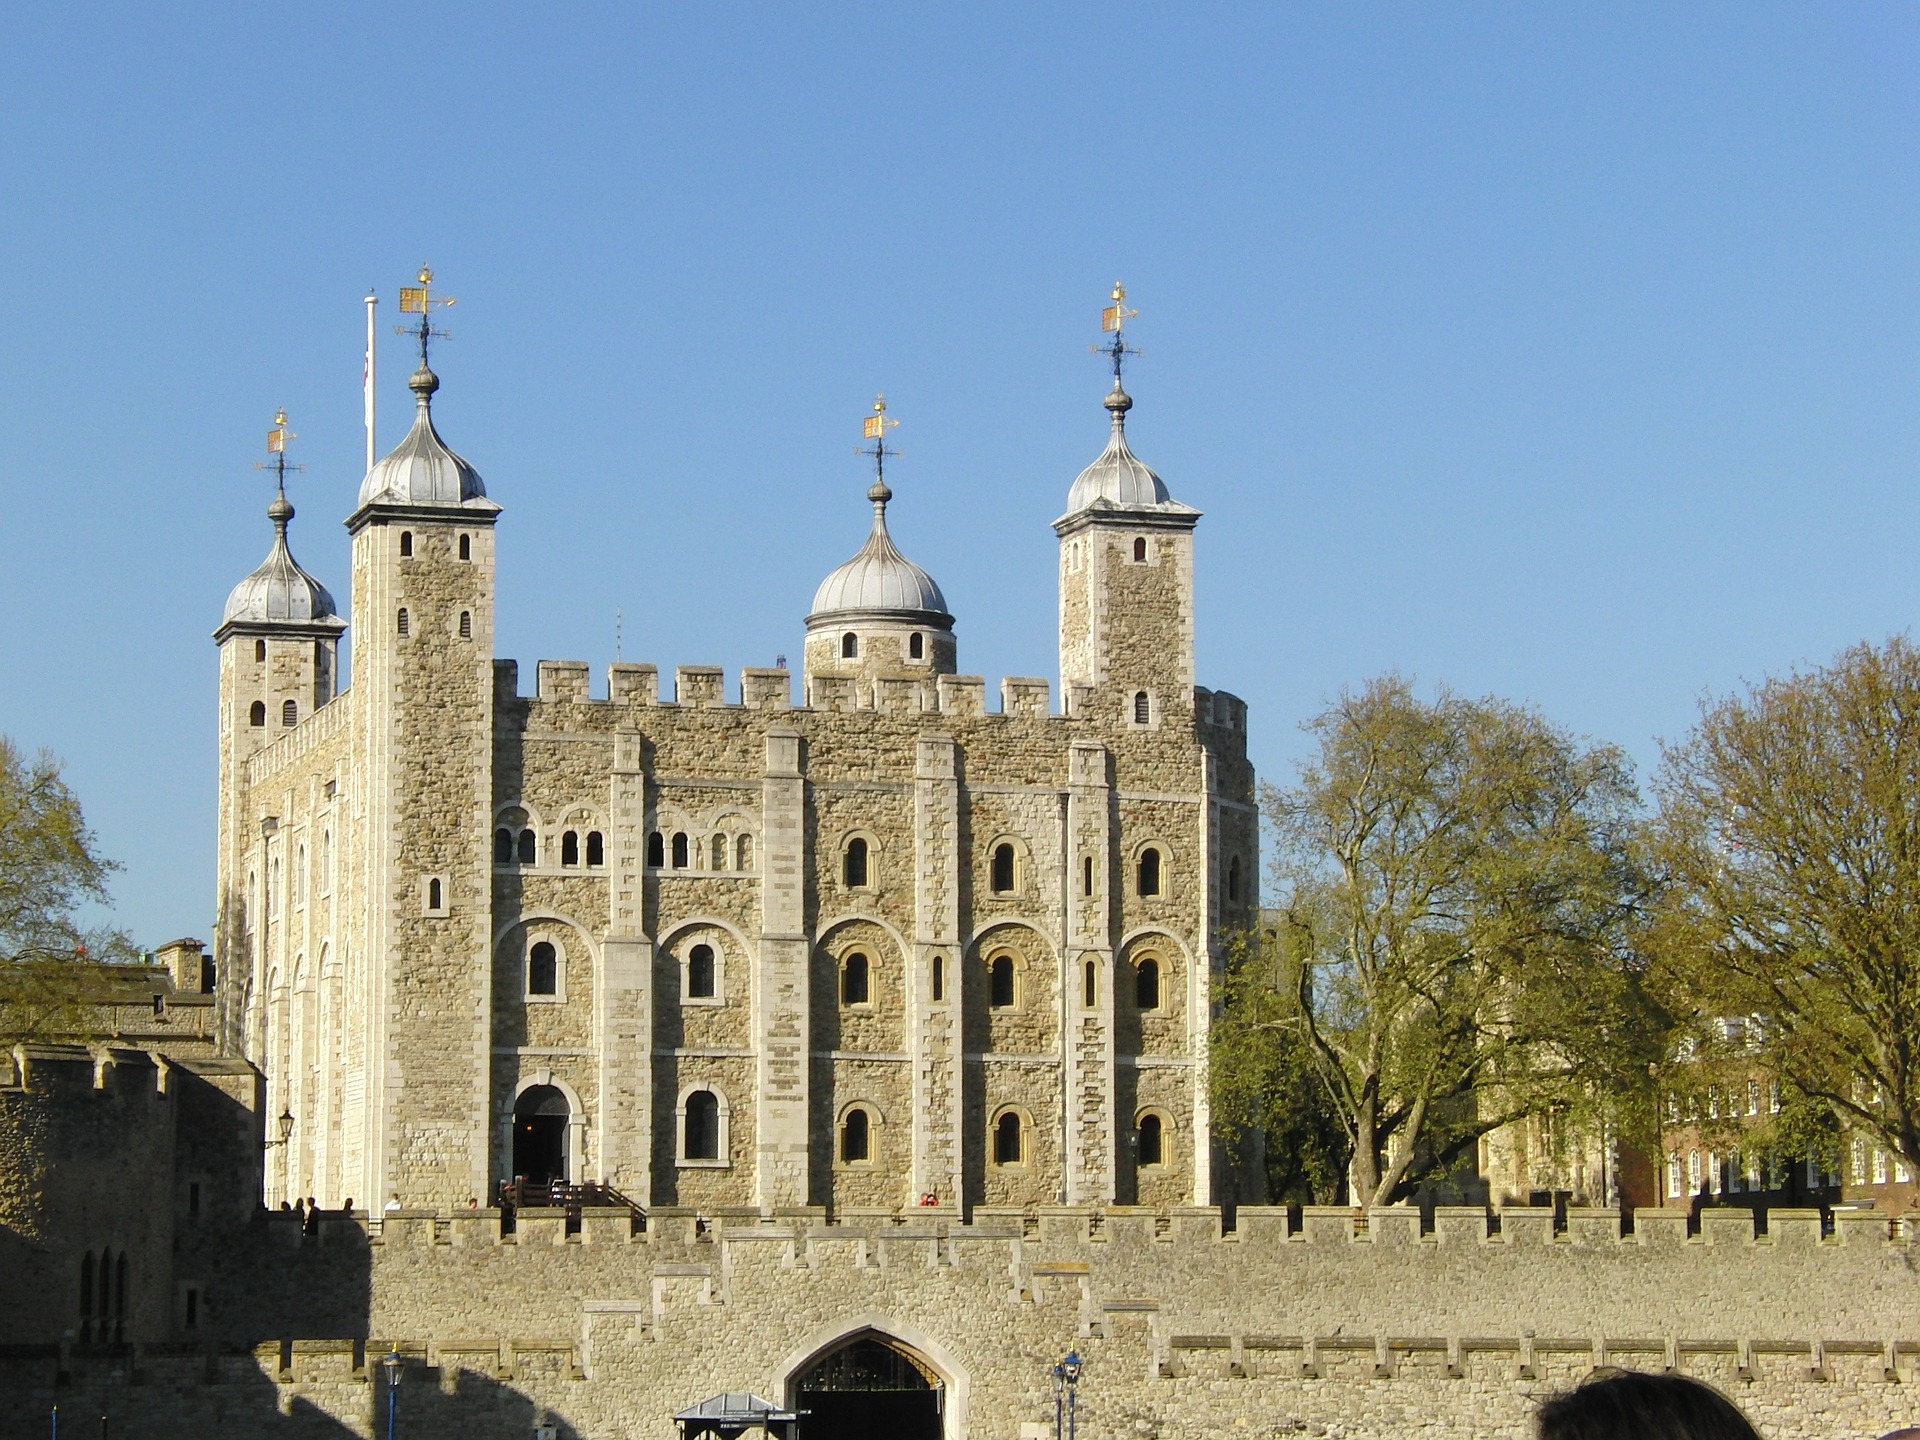 Guide to The Tower of London